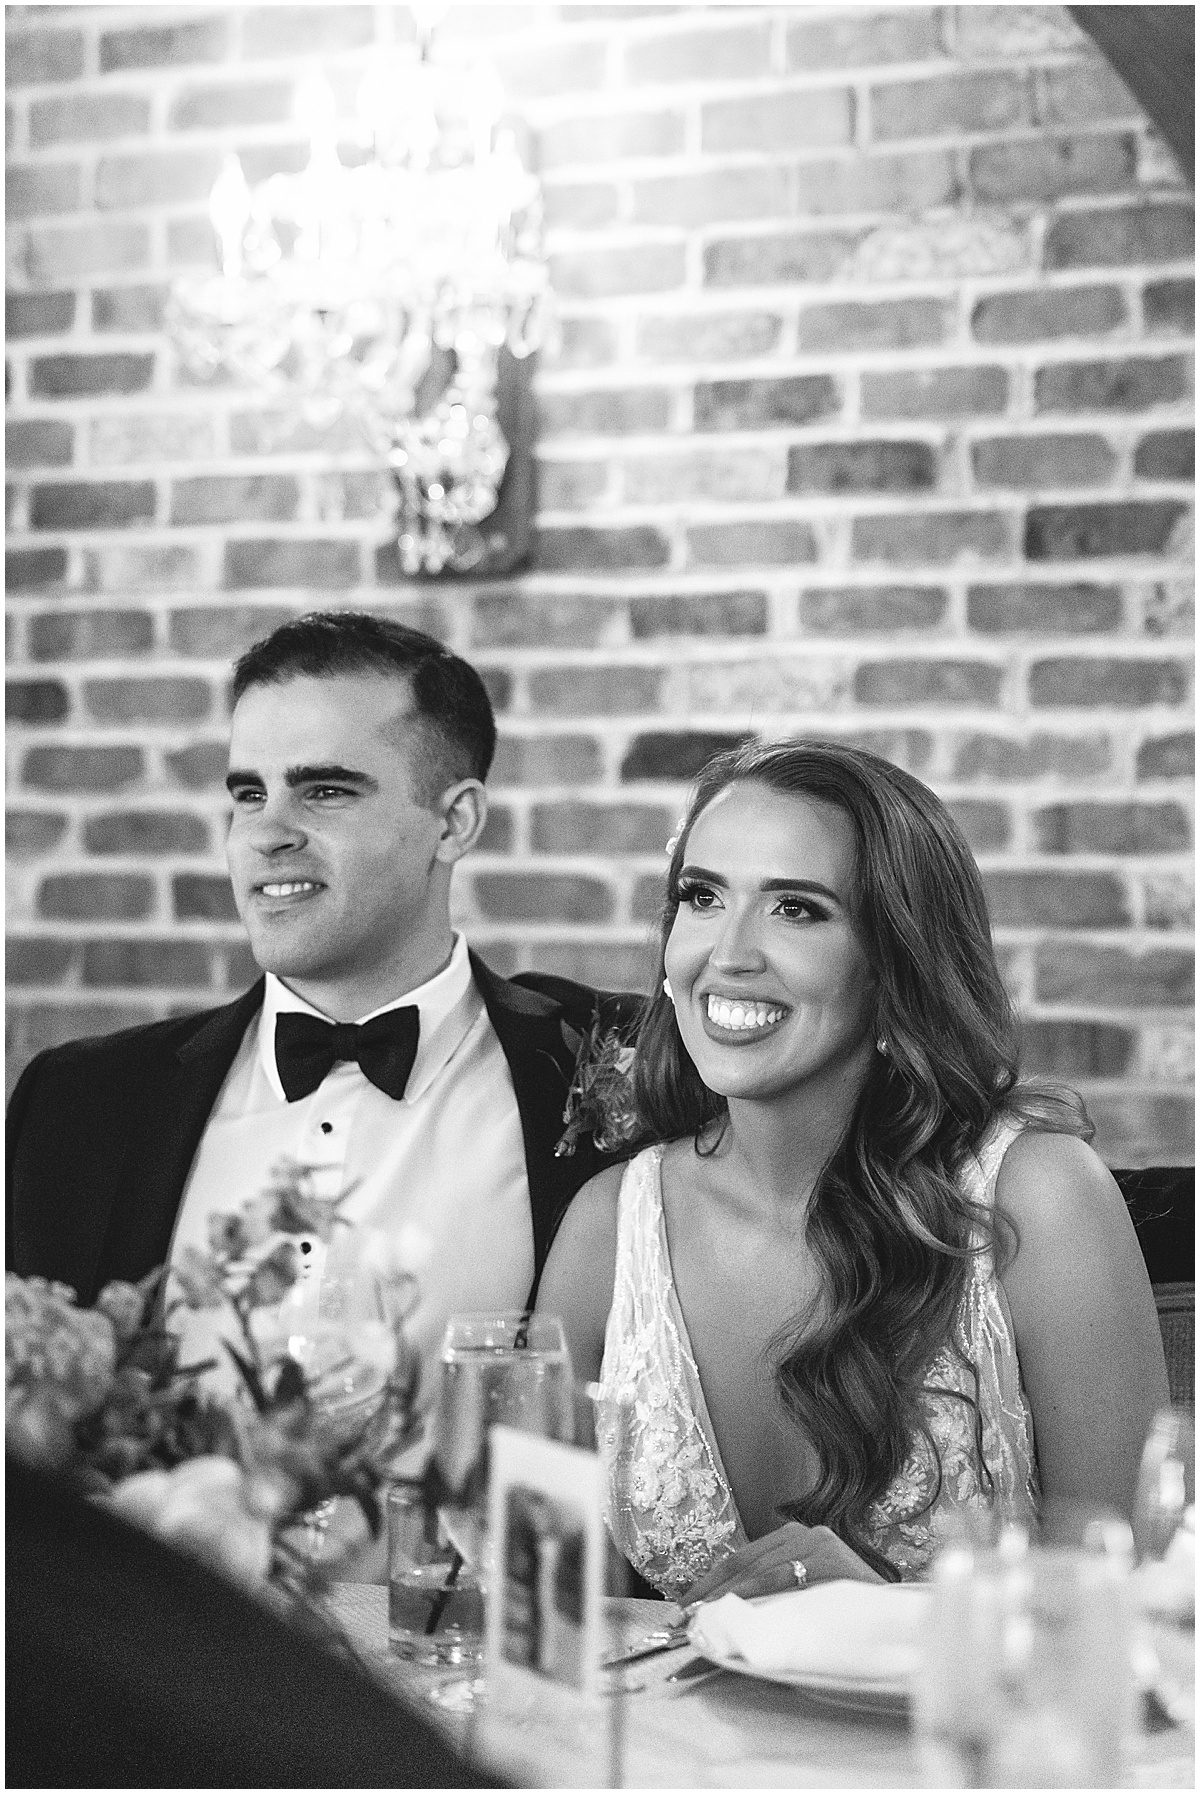 Black and White of Bride and Groom at Wedding Reception Photo